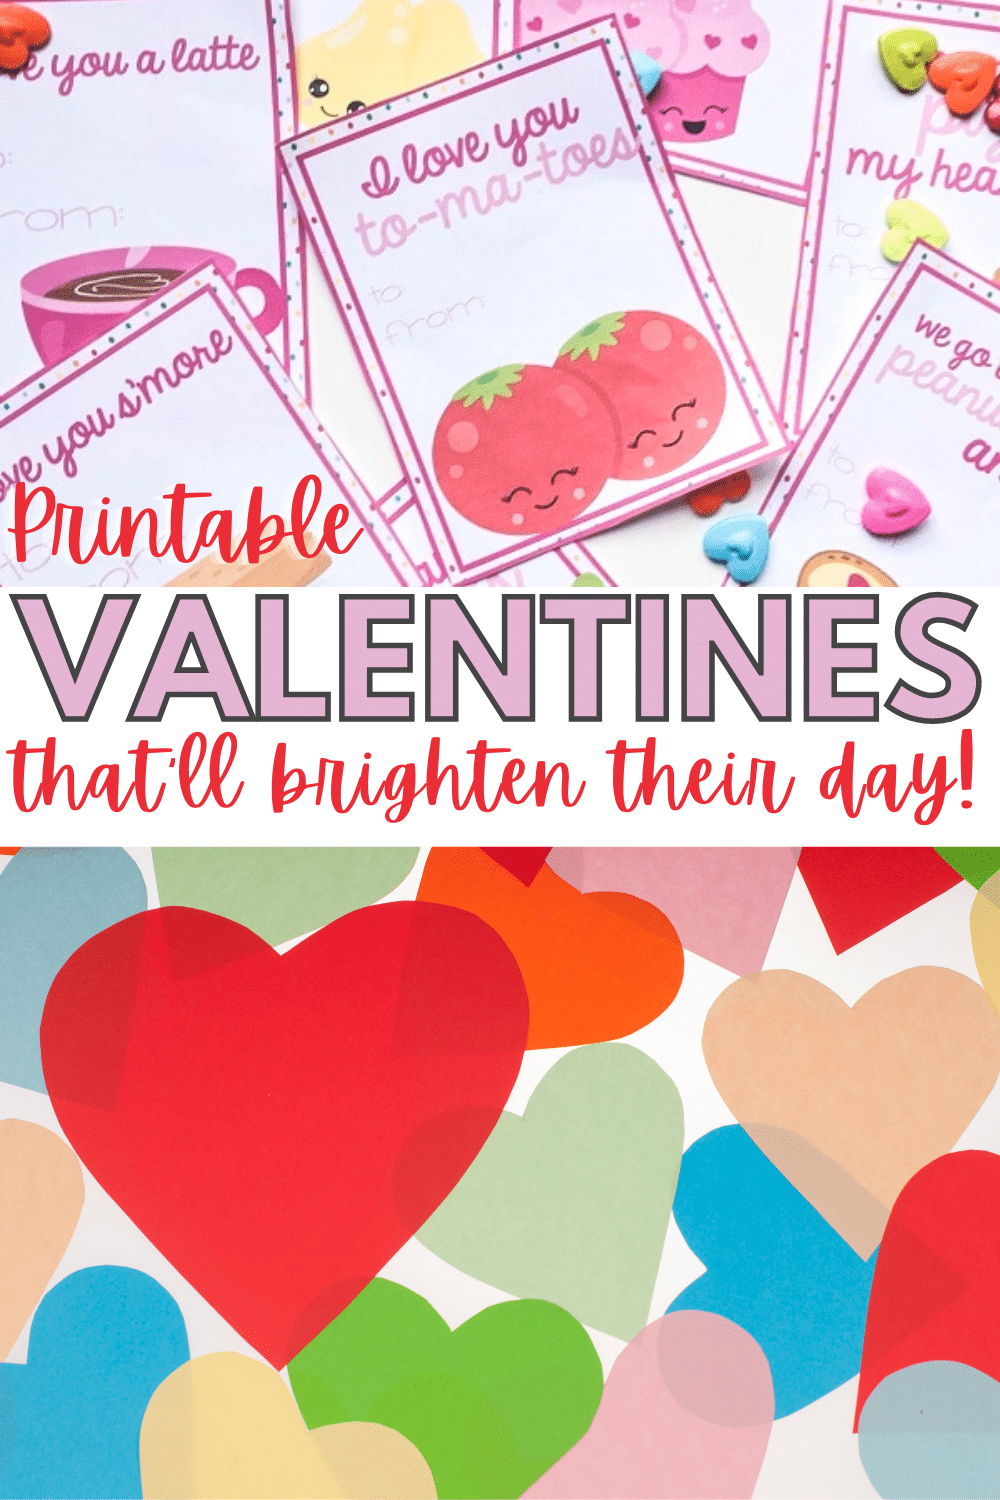 These free printable Valentines are adorable for kids to hand out on Valentine's Day. Attach a small treat or write a compliment on the back of each card! #printables #Valentines via @wondermomwannab